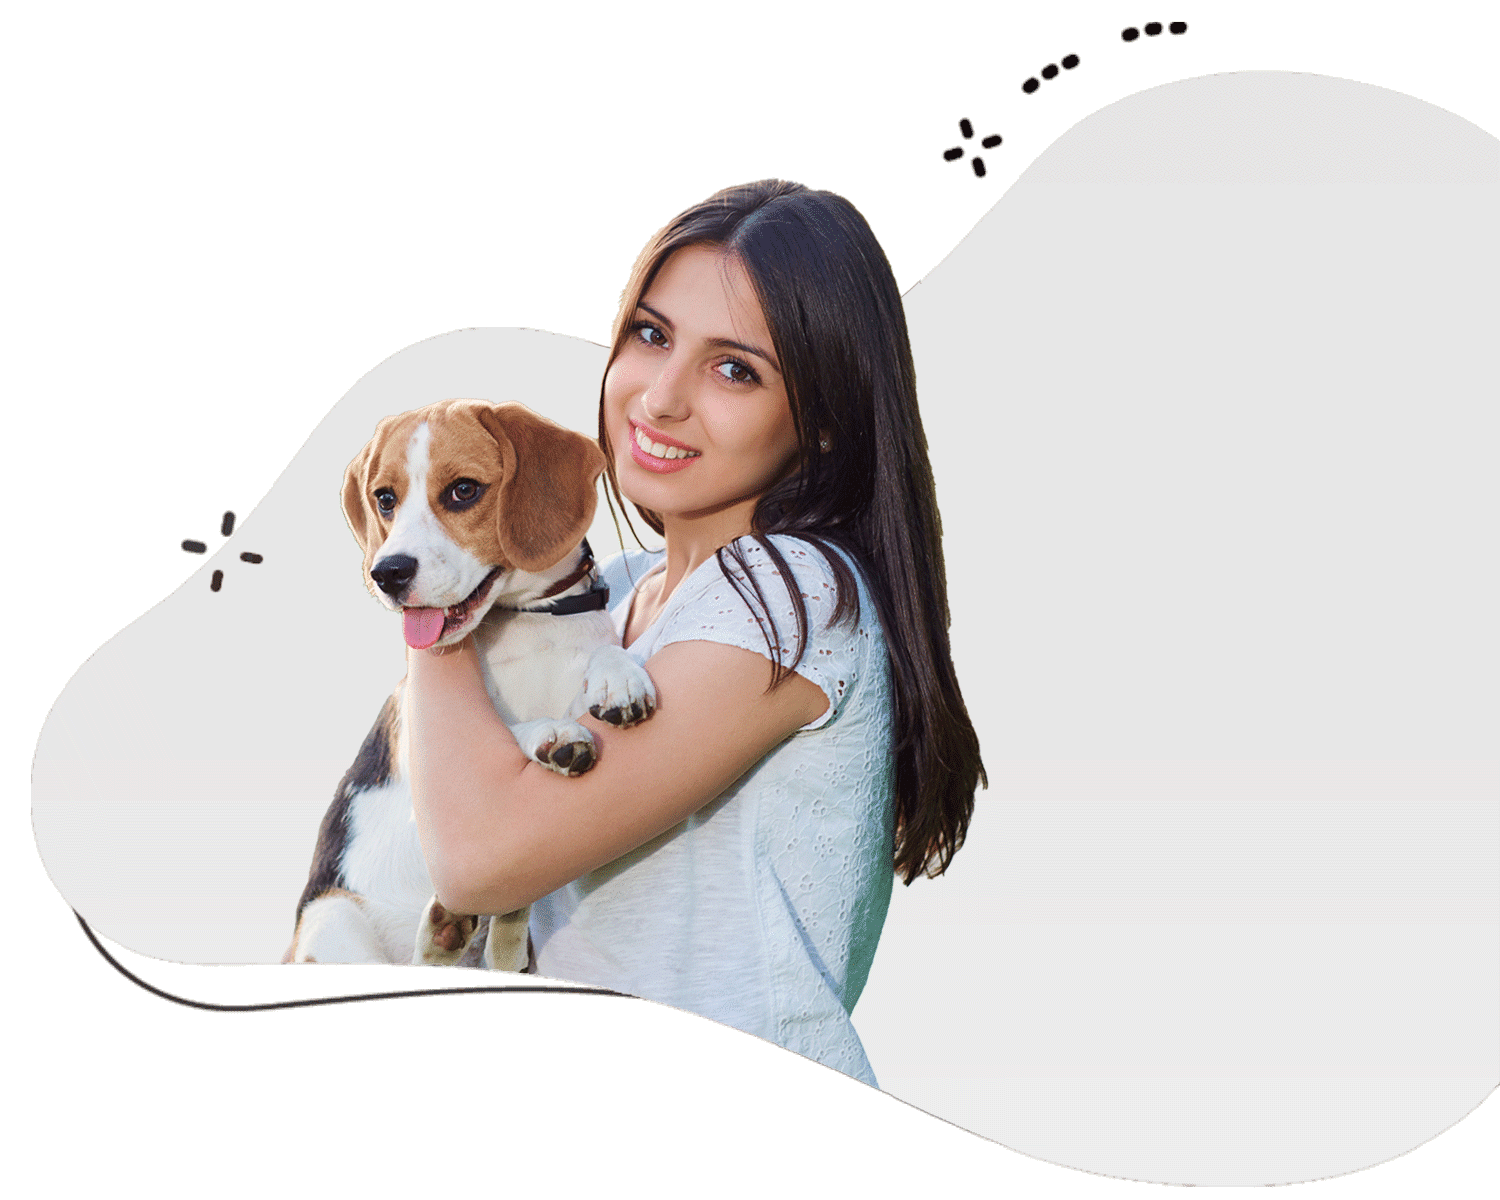 Loving female dog sitter wearing a grey shirt with brown hair holding a beagle in her arms and providing services in the UAE